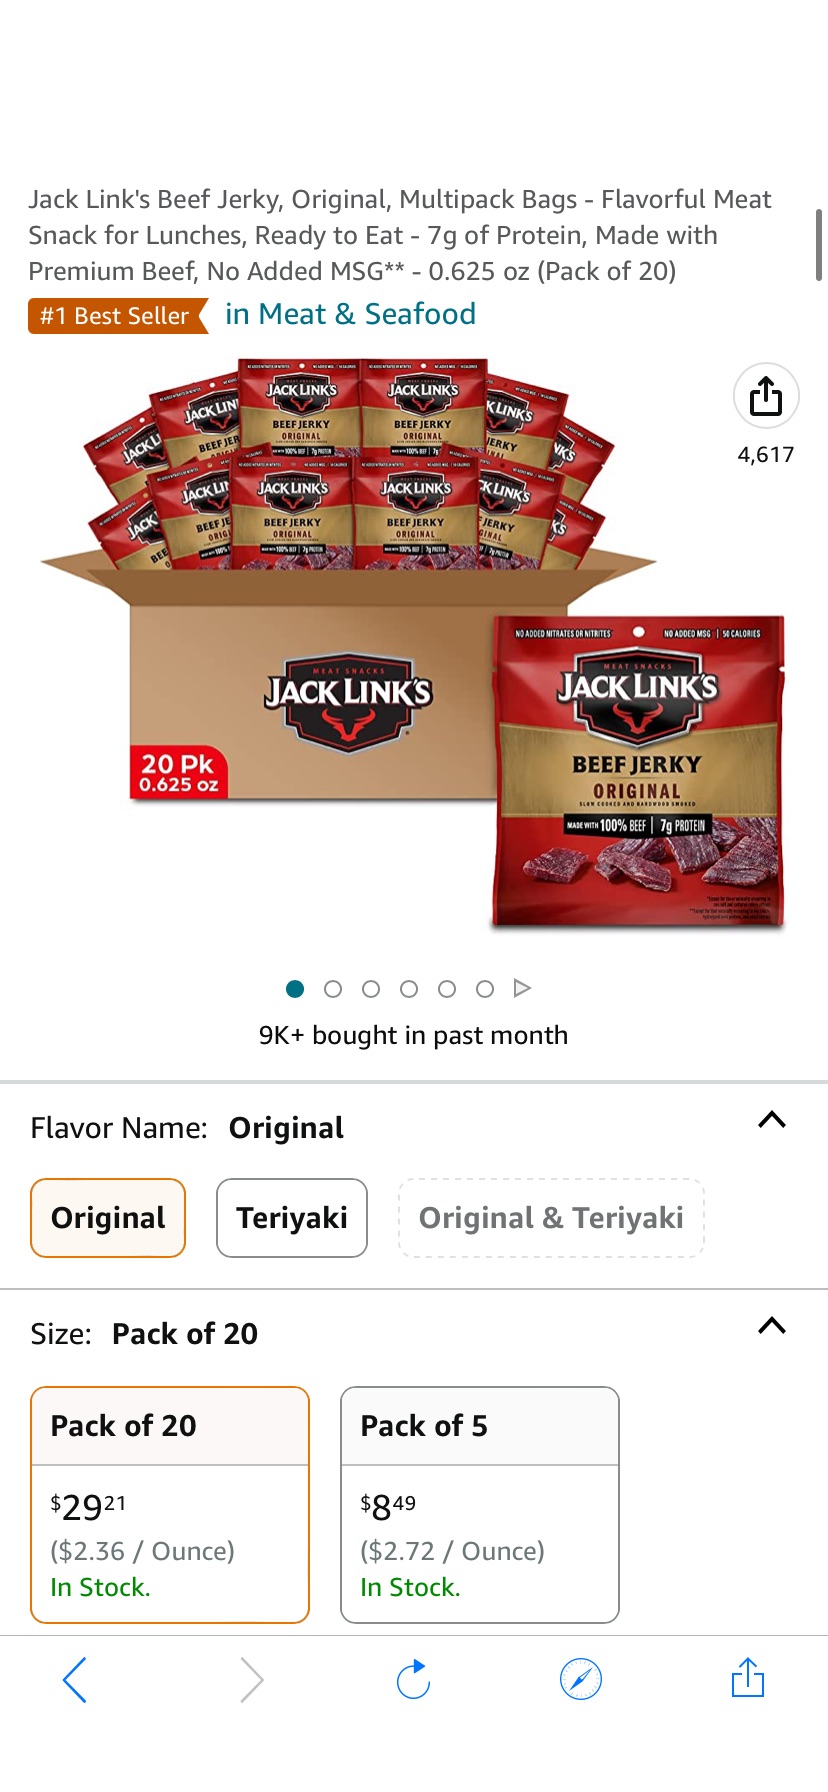 Amazon.com: Jack Link's 原味牛肉干Beef Jerky, Original, Multipack Bags - Flavorful Meat Snack for Lunches, Ready to Eat - 7g of Protein, Made with Premium Beef, No Added MSG** - 0.625 oz (Pack of 20) : Grocery & Gourmet Food